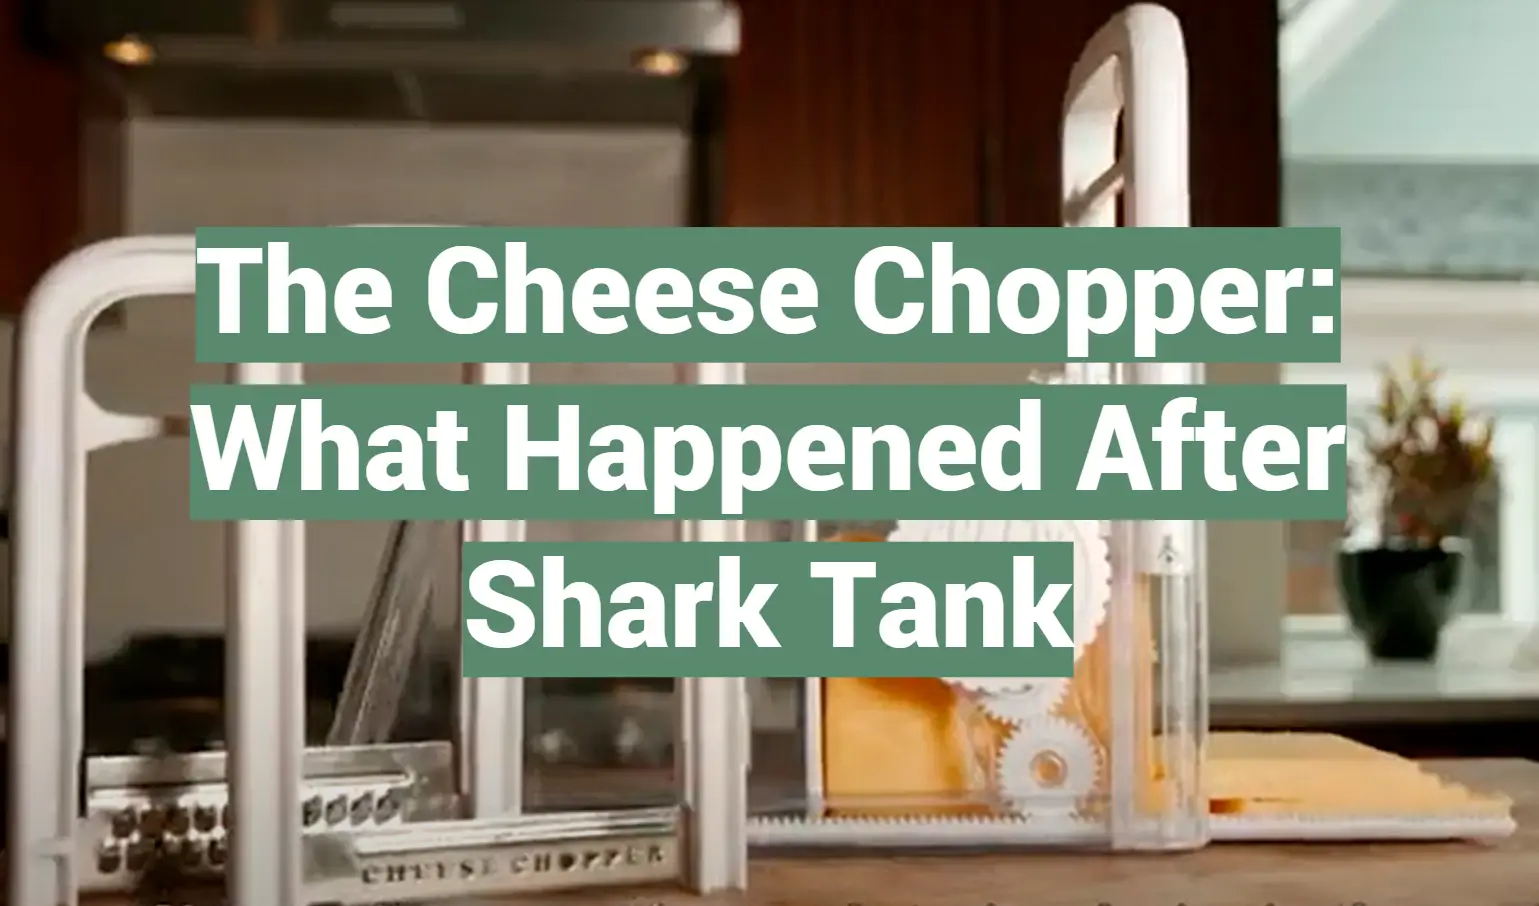 The Cheese Chopper: What Happened After Shark Tank